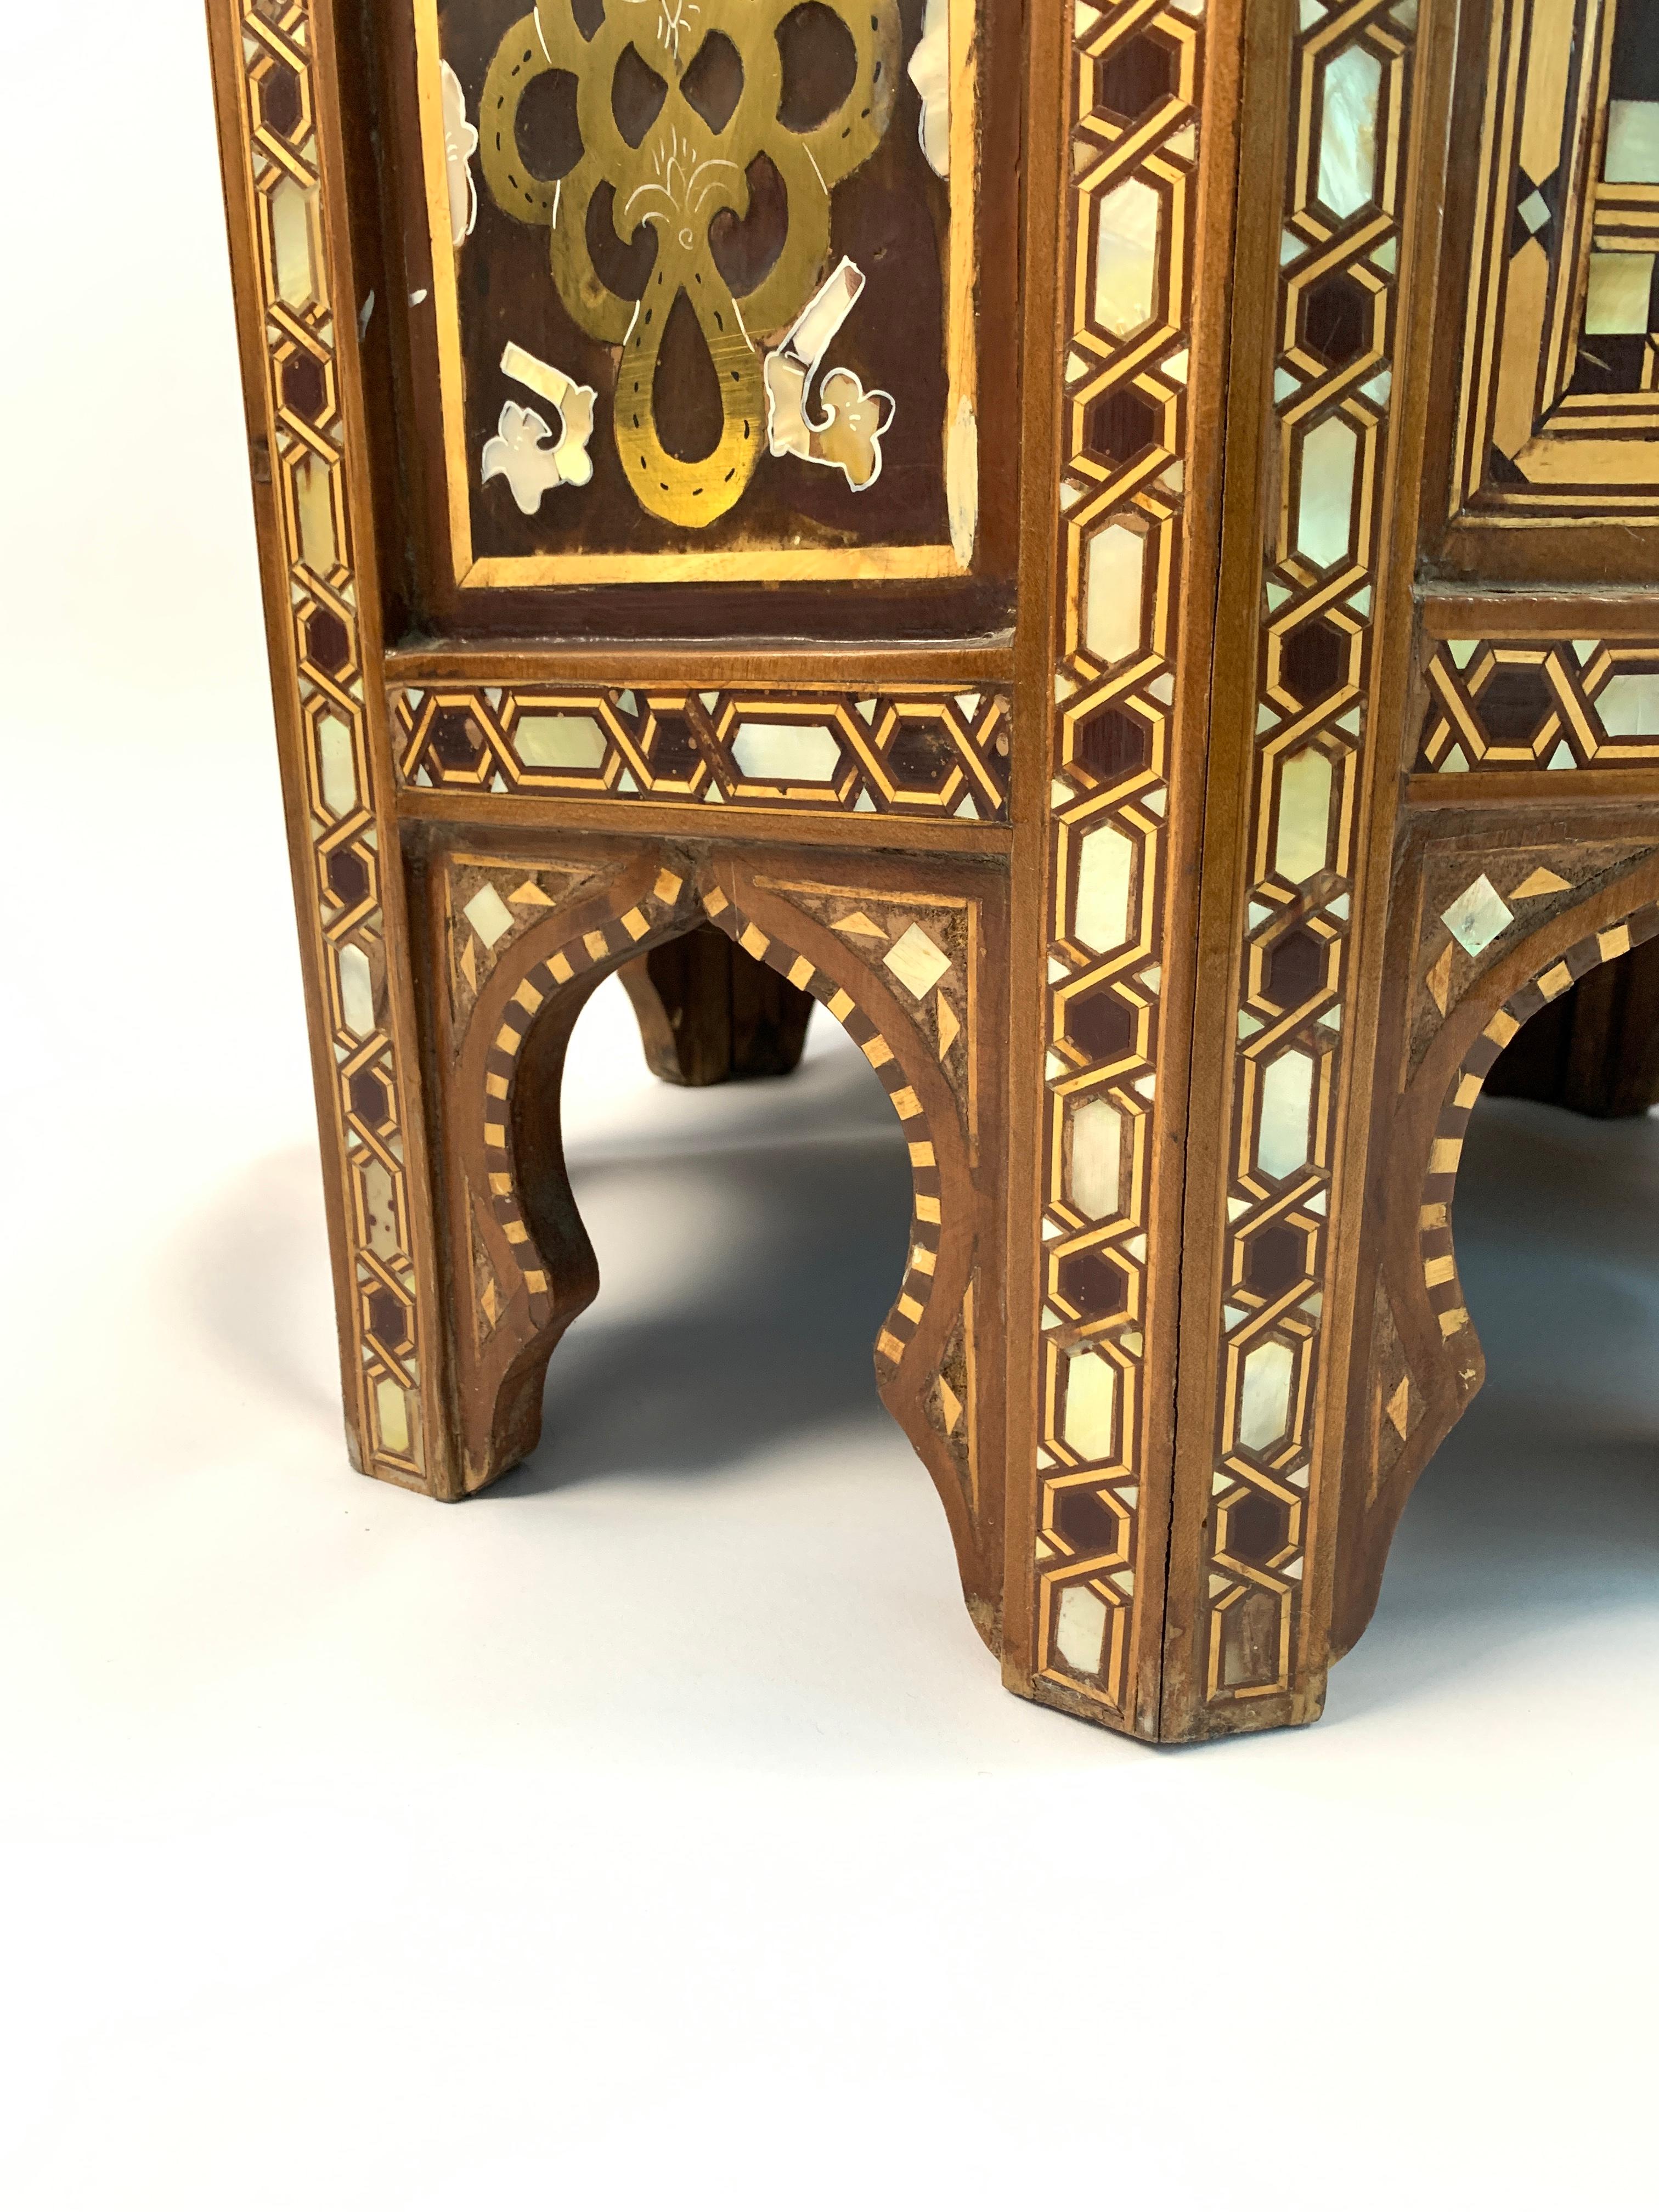 Tortoise Shell Pair of Ottoman Mother-of-pearl and Tortoiseshell Stands, 19th Century For Sale